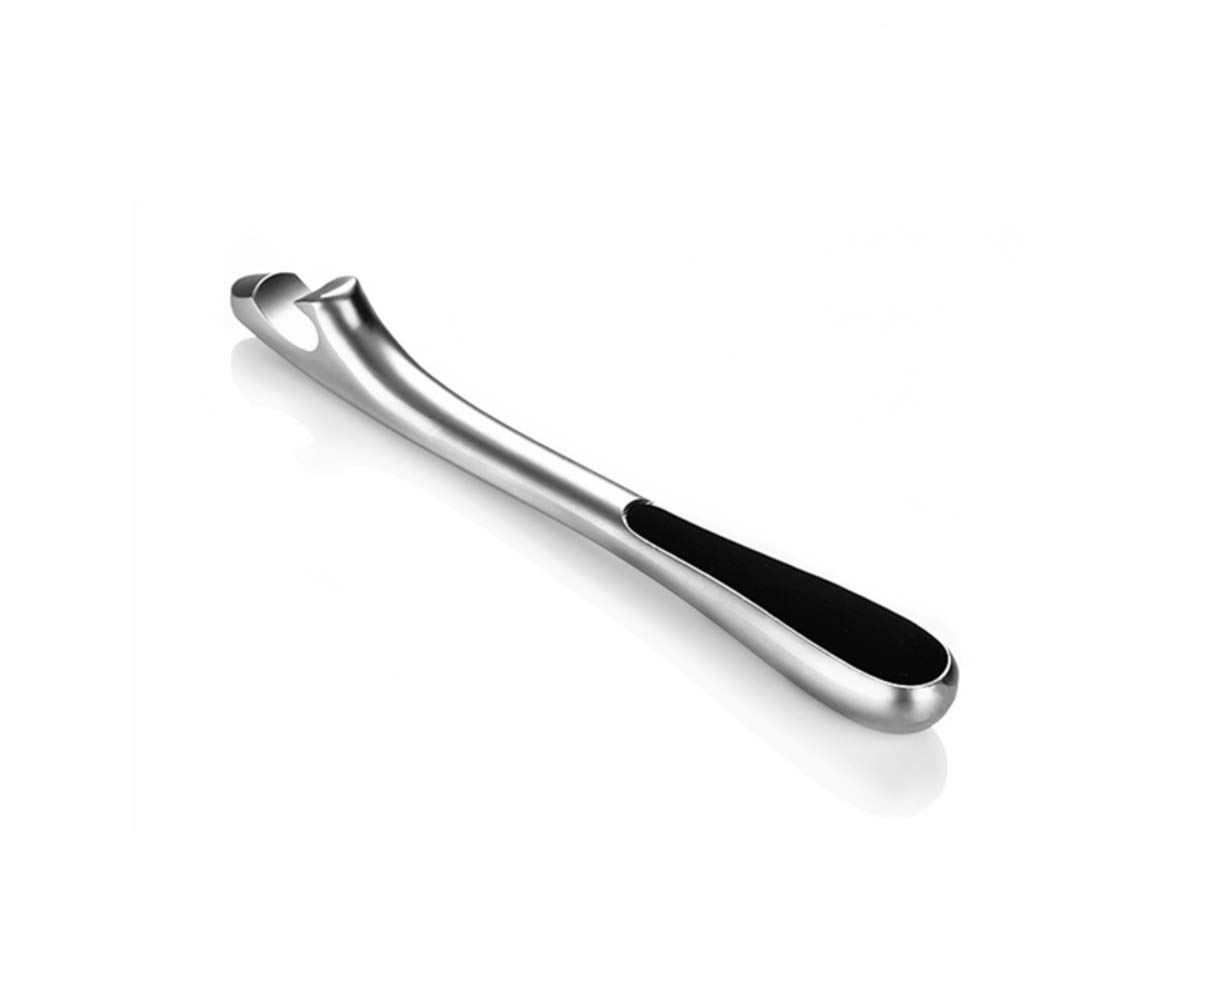 JIUMX Zinc Alloy Bottle Opener,Streamline Design With Comfortable And Excellent Hand Feeling,Daily Necessary Kitchen Supplies